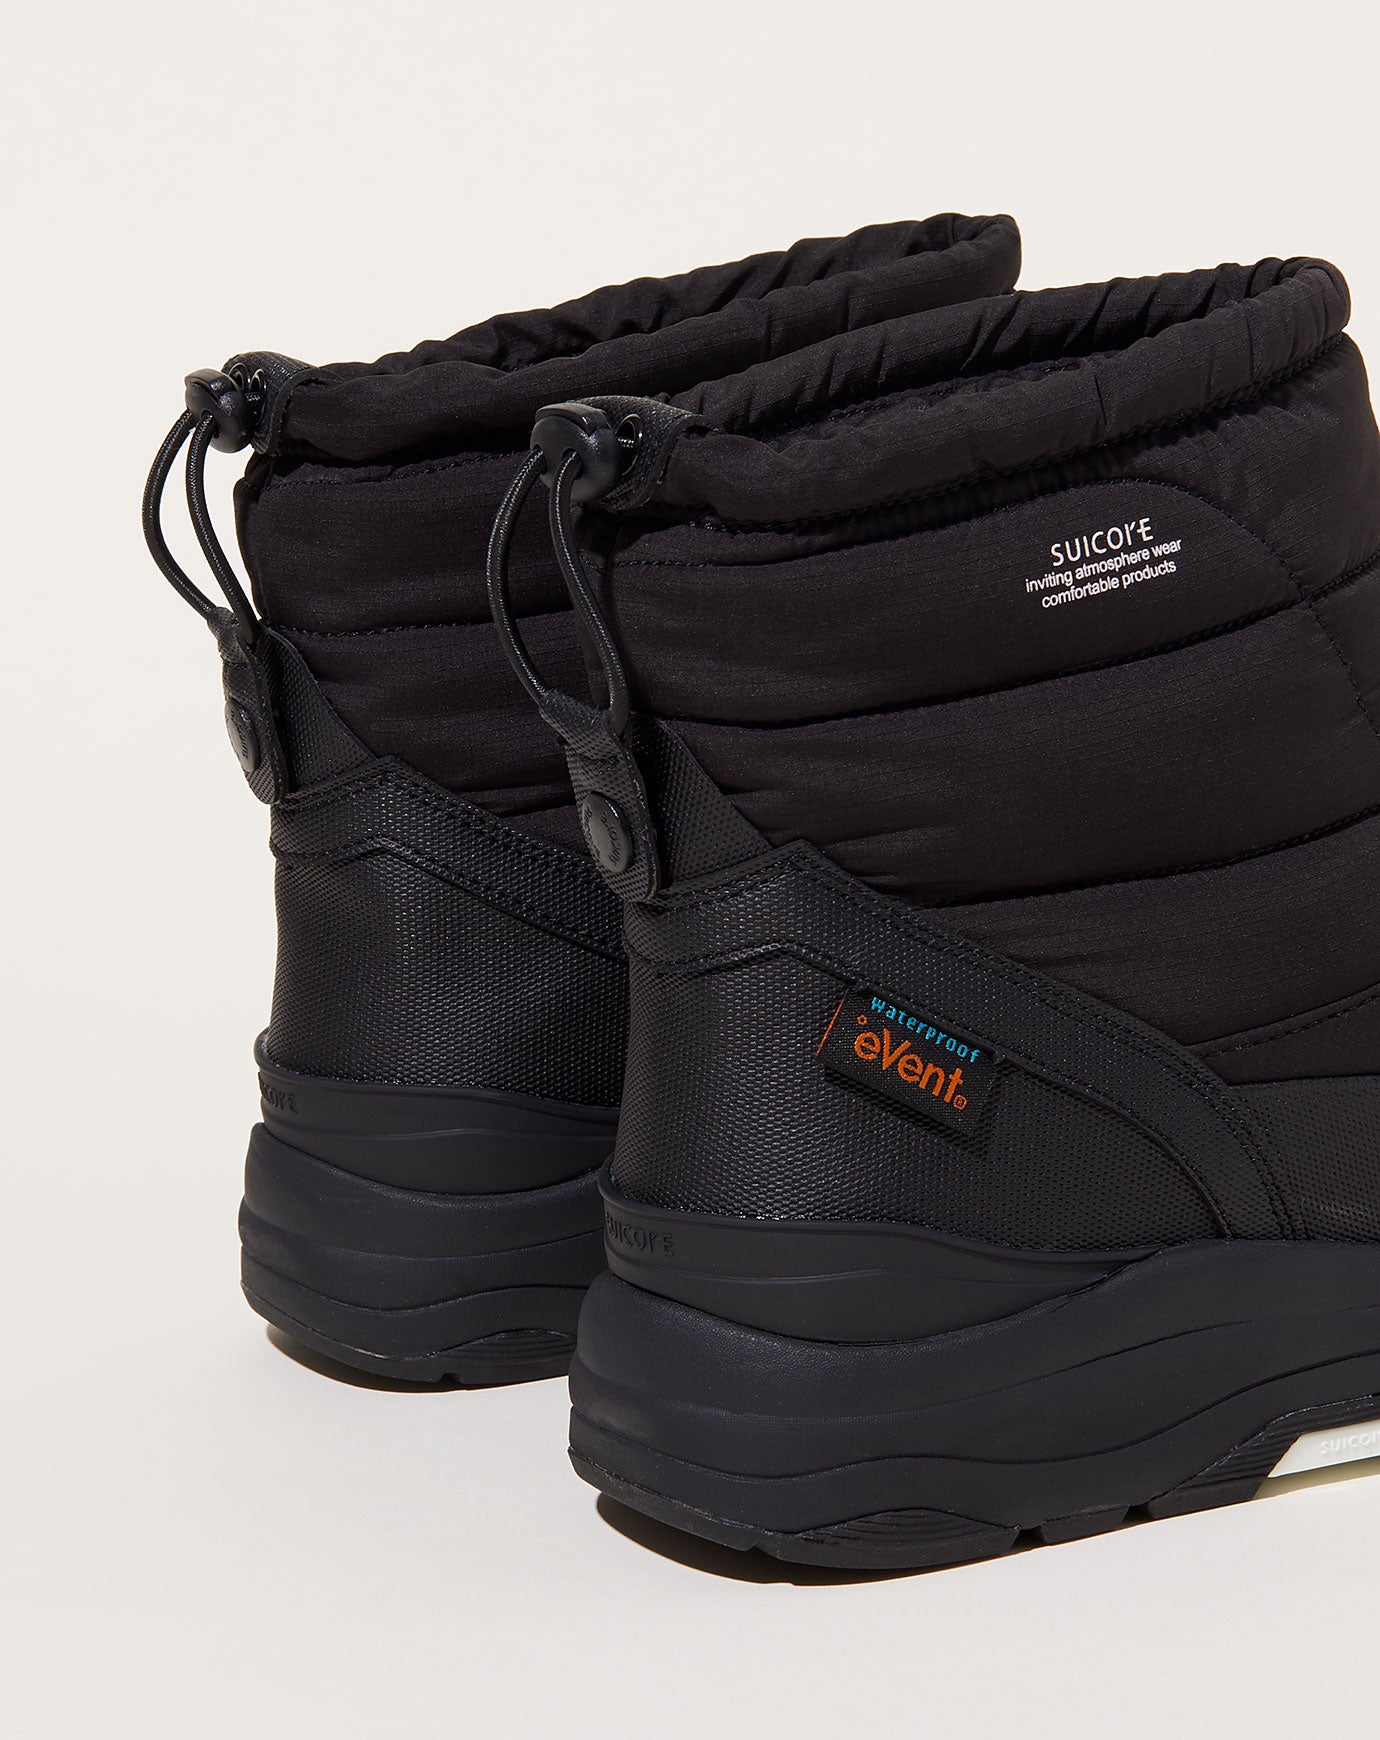 Suicoke BOWER-evab Boot in Black